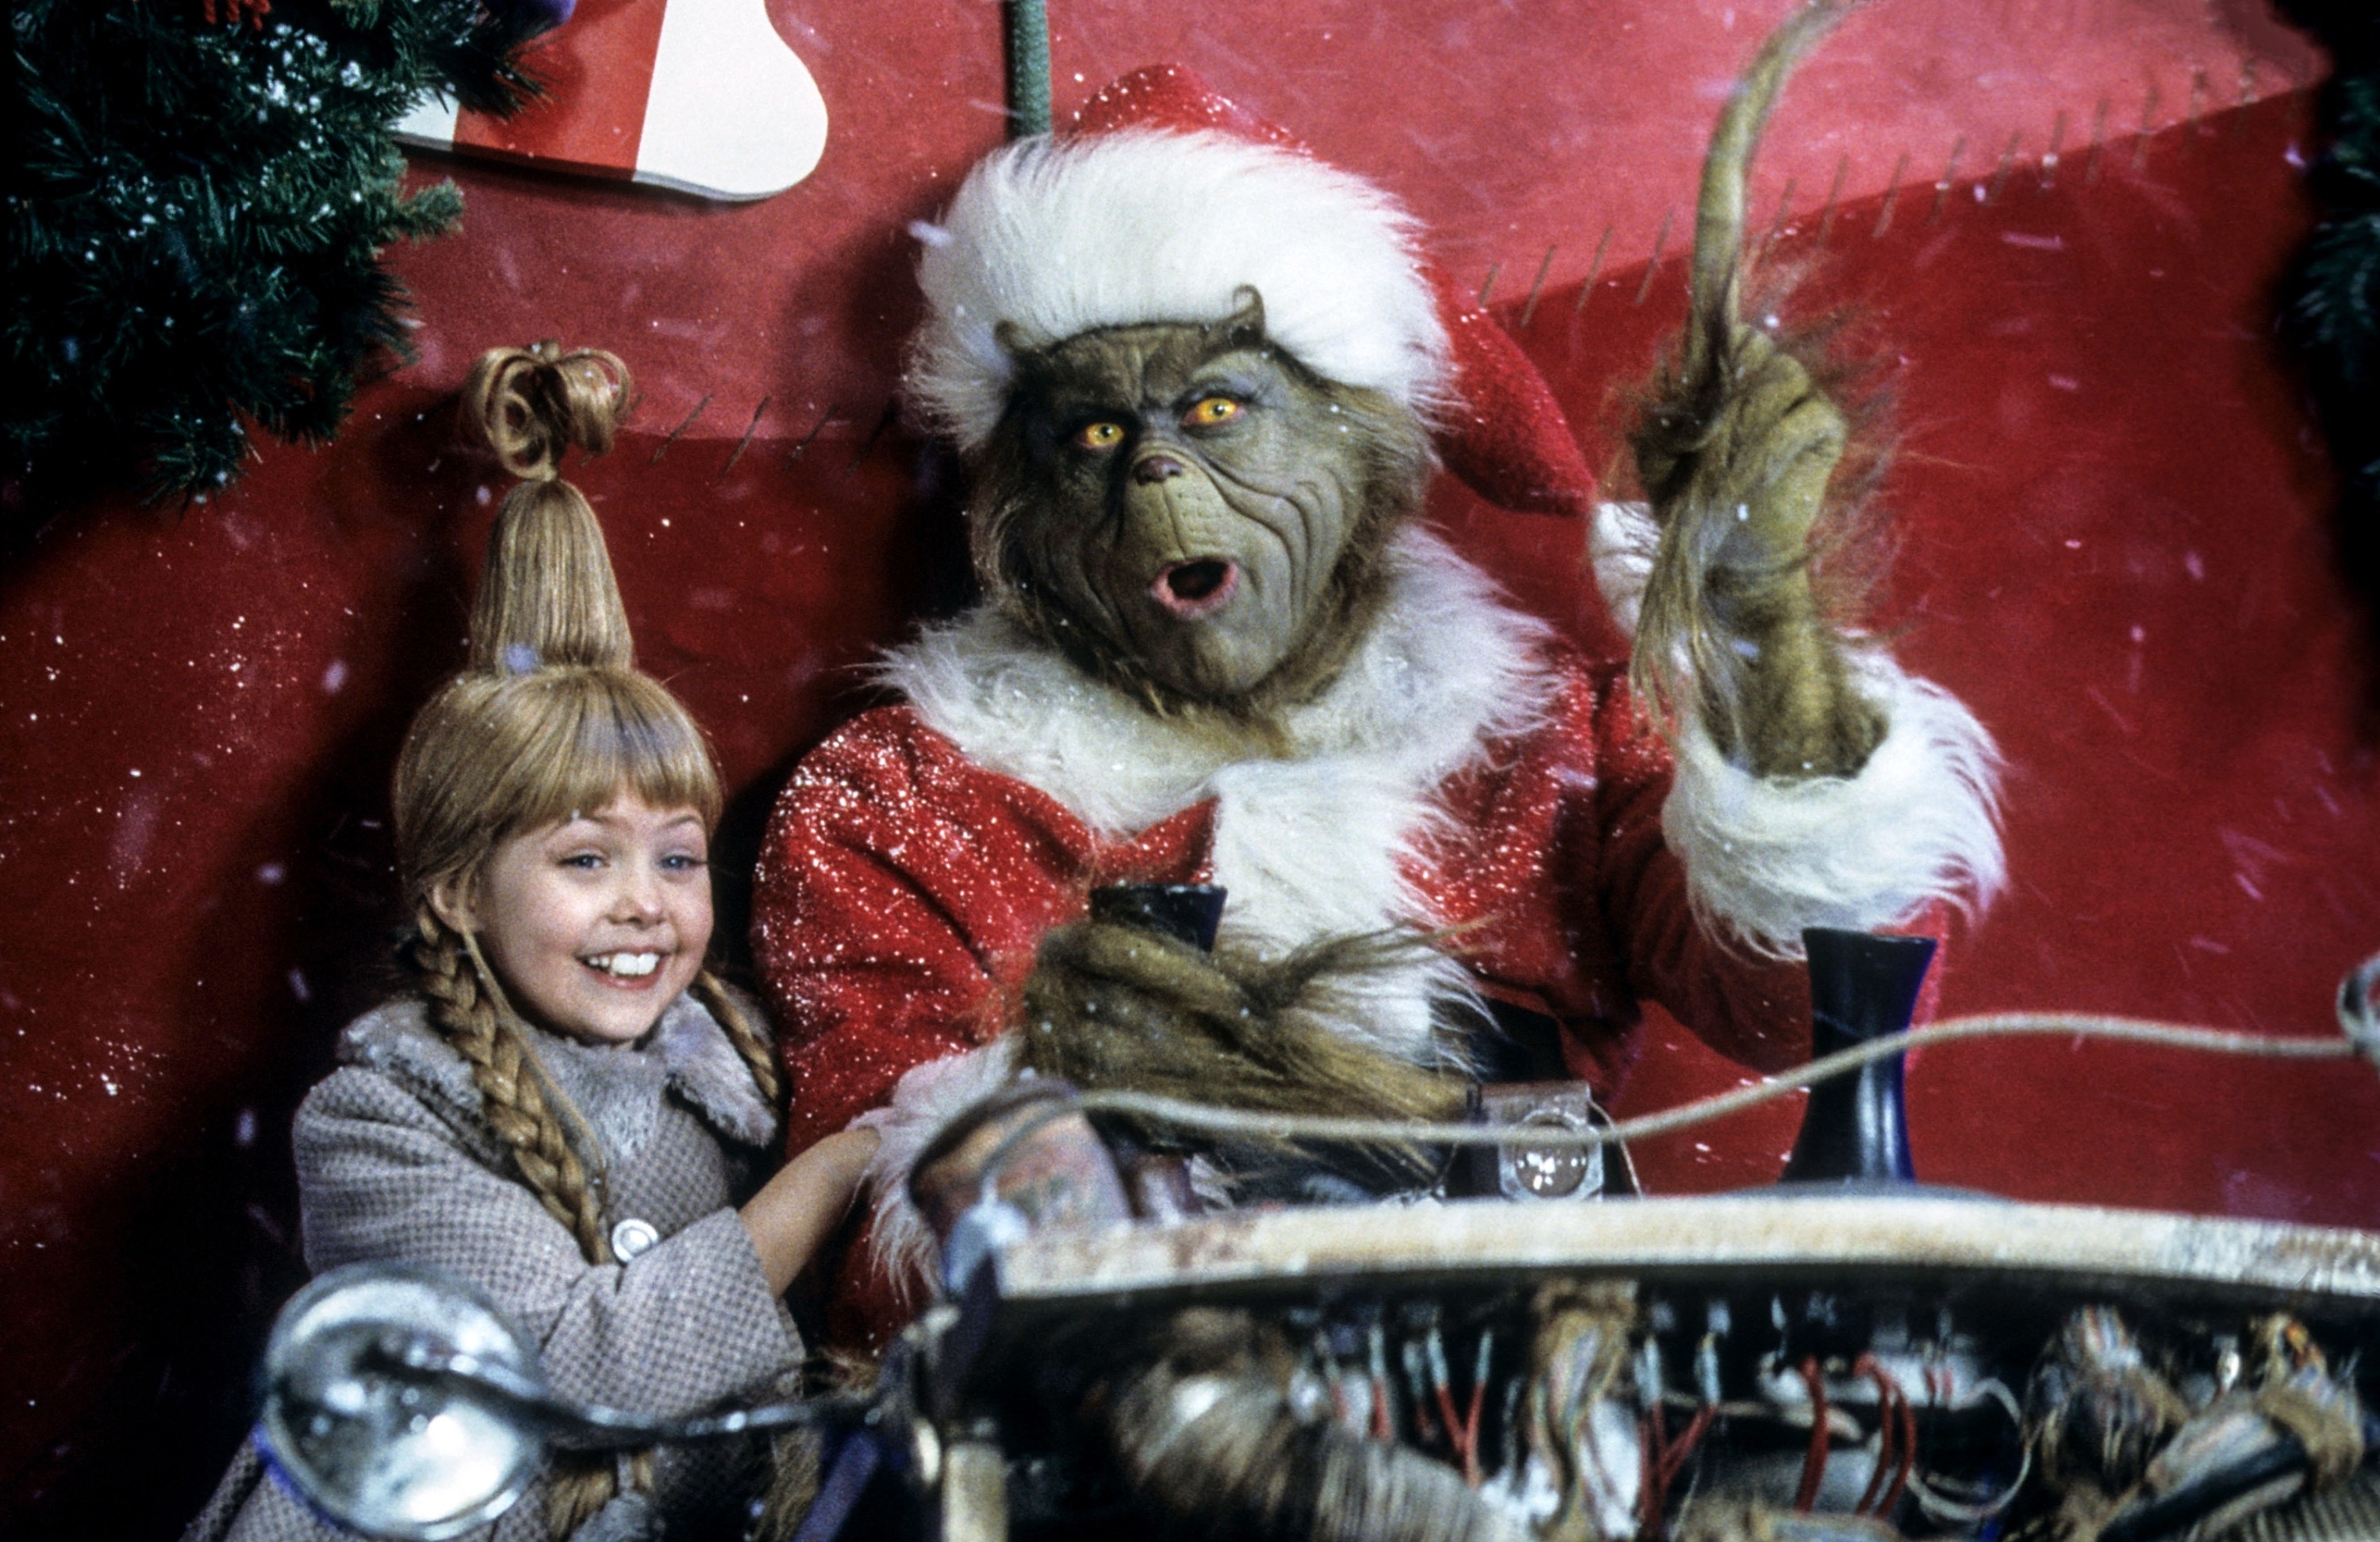 Taylor Momsen with Jim Carrey as the Grinch in The Grinch